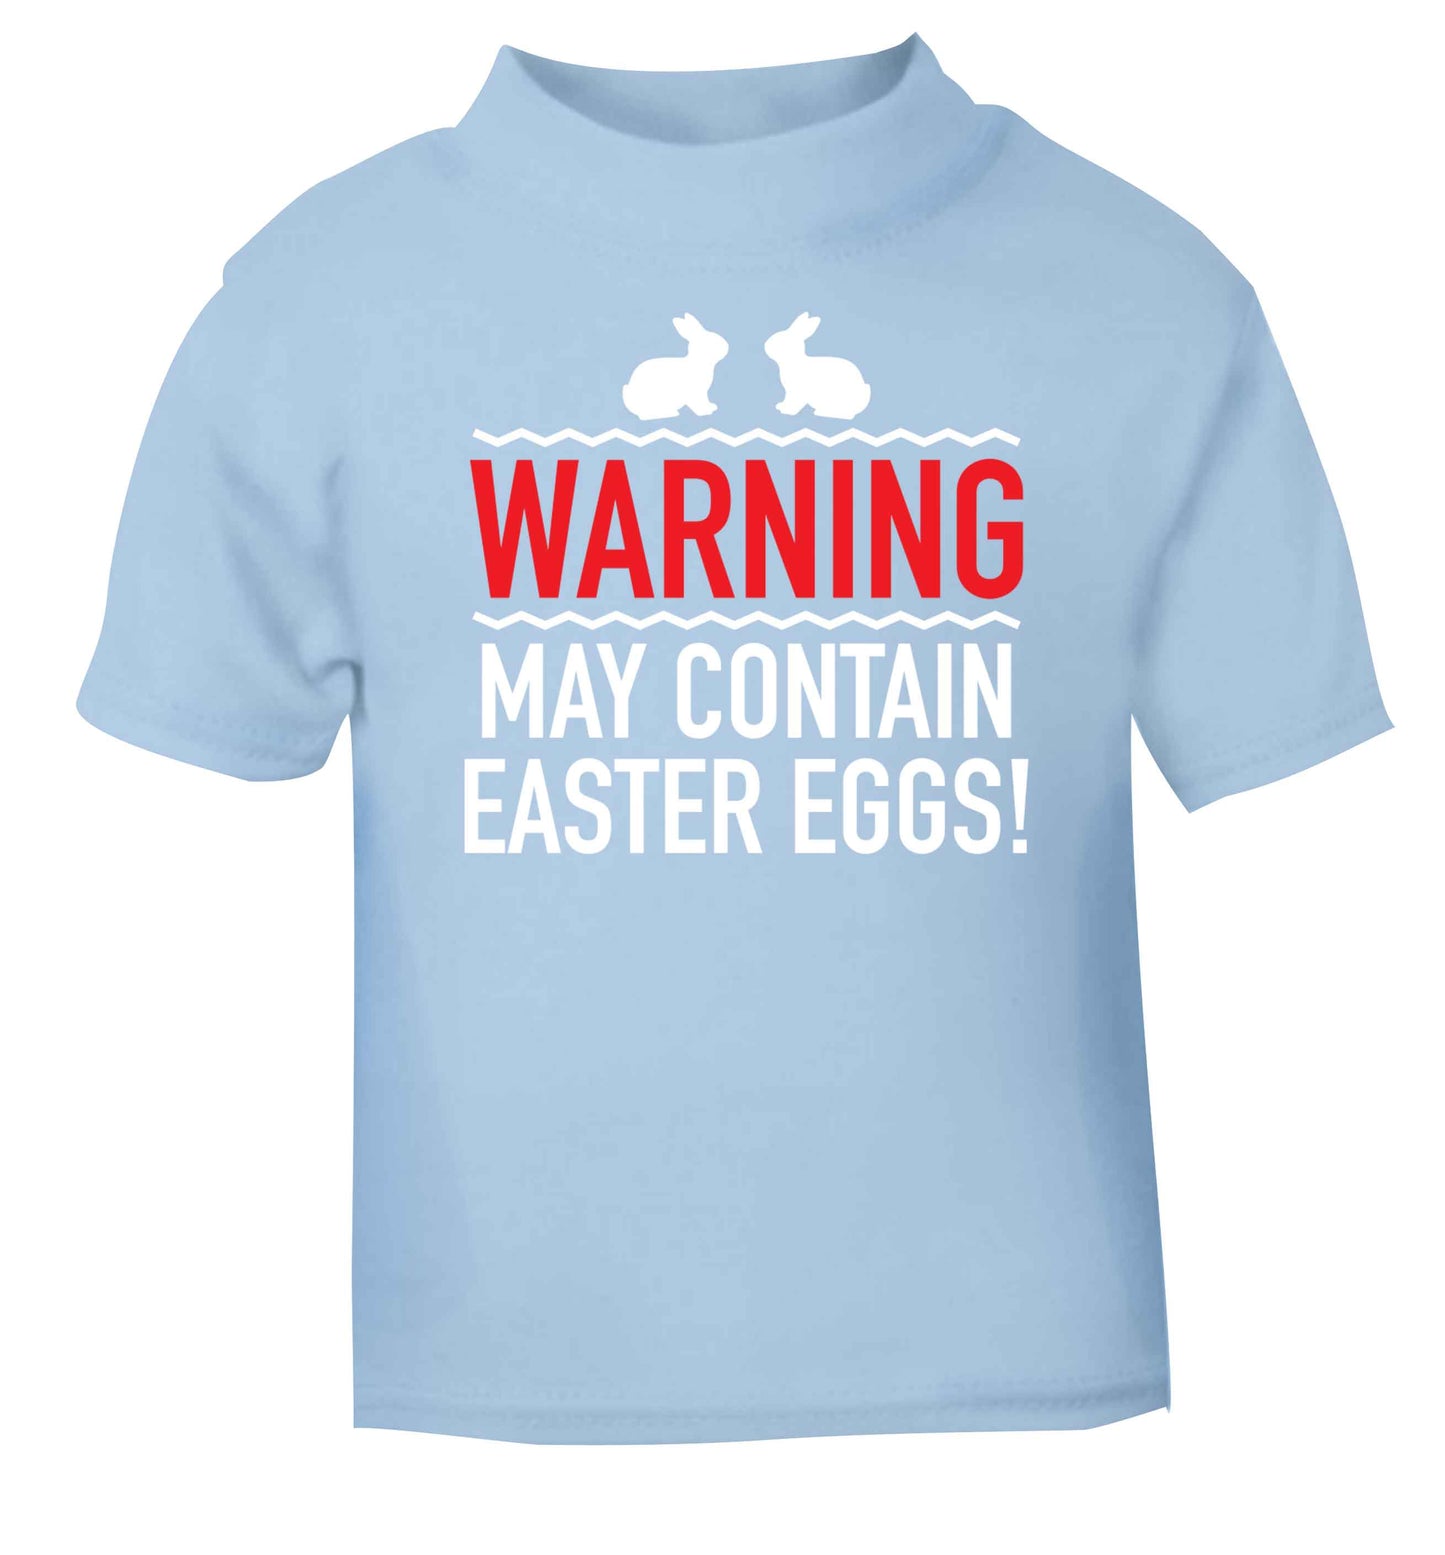 Warning may contain Easter eggs light blue baby toddler Tshirt 2 Years